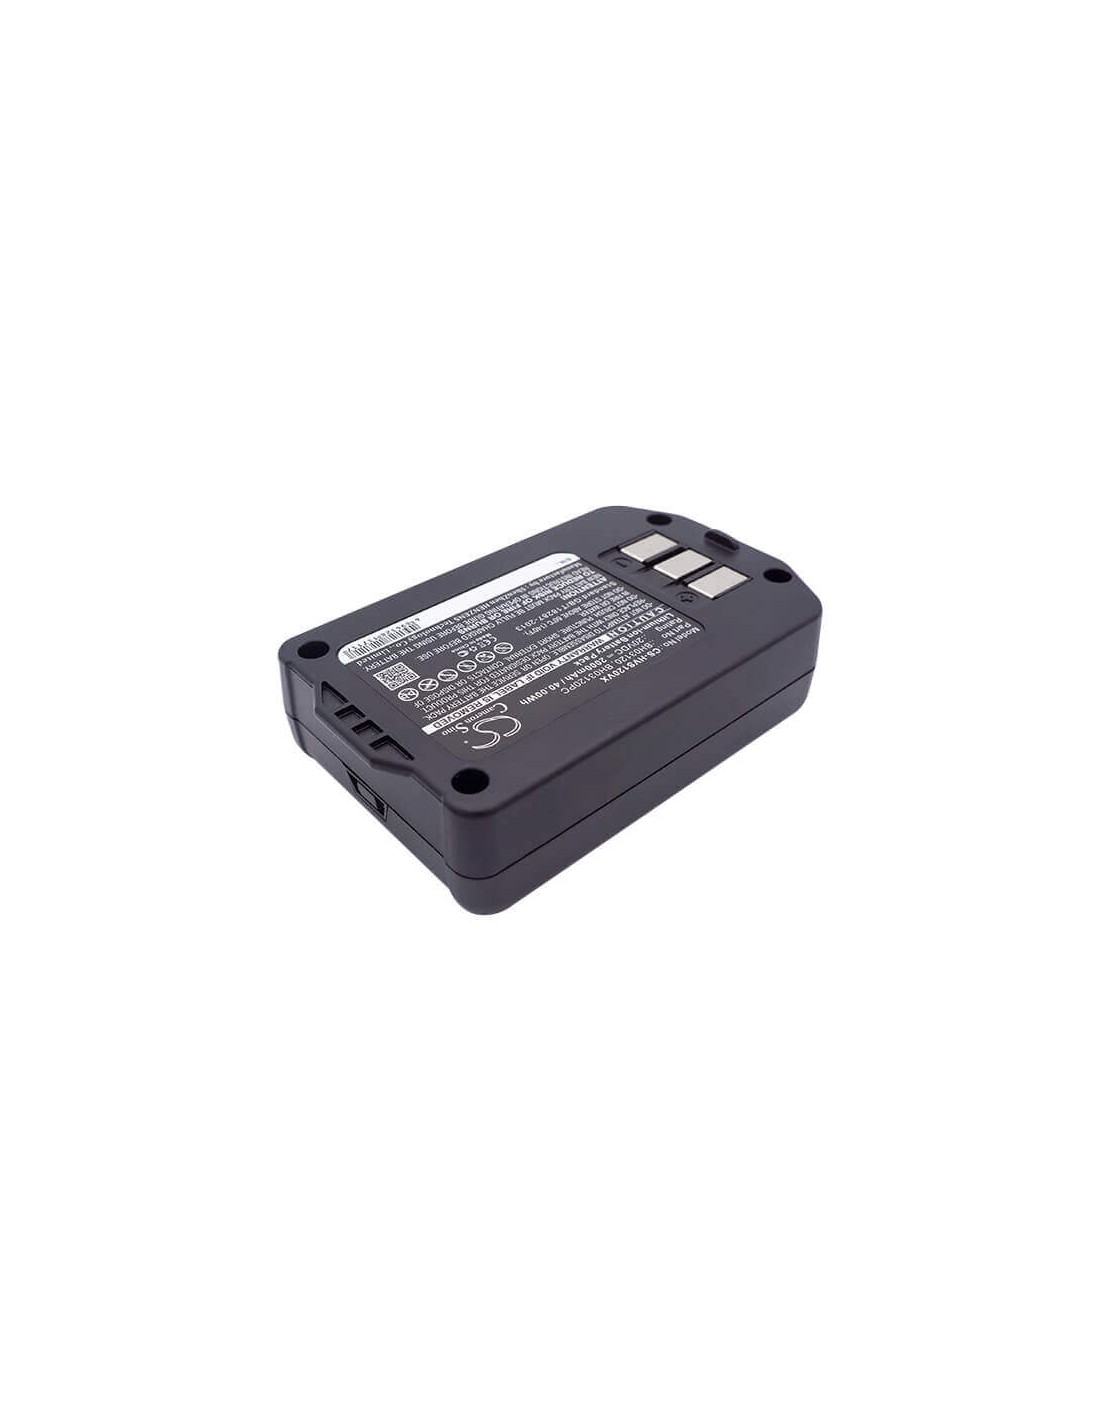 https://www.canadianbatteries.com/237763-thickbox_default/battery-for-hoover-bh03100-bh03120-bh03120pc-20v-2000mah-4000wh.jpg